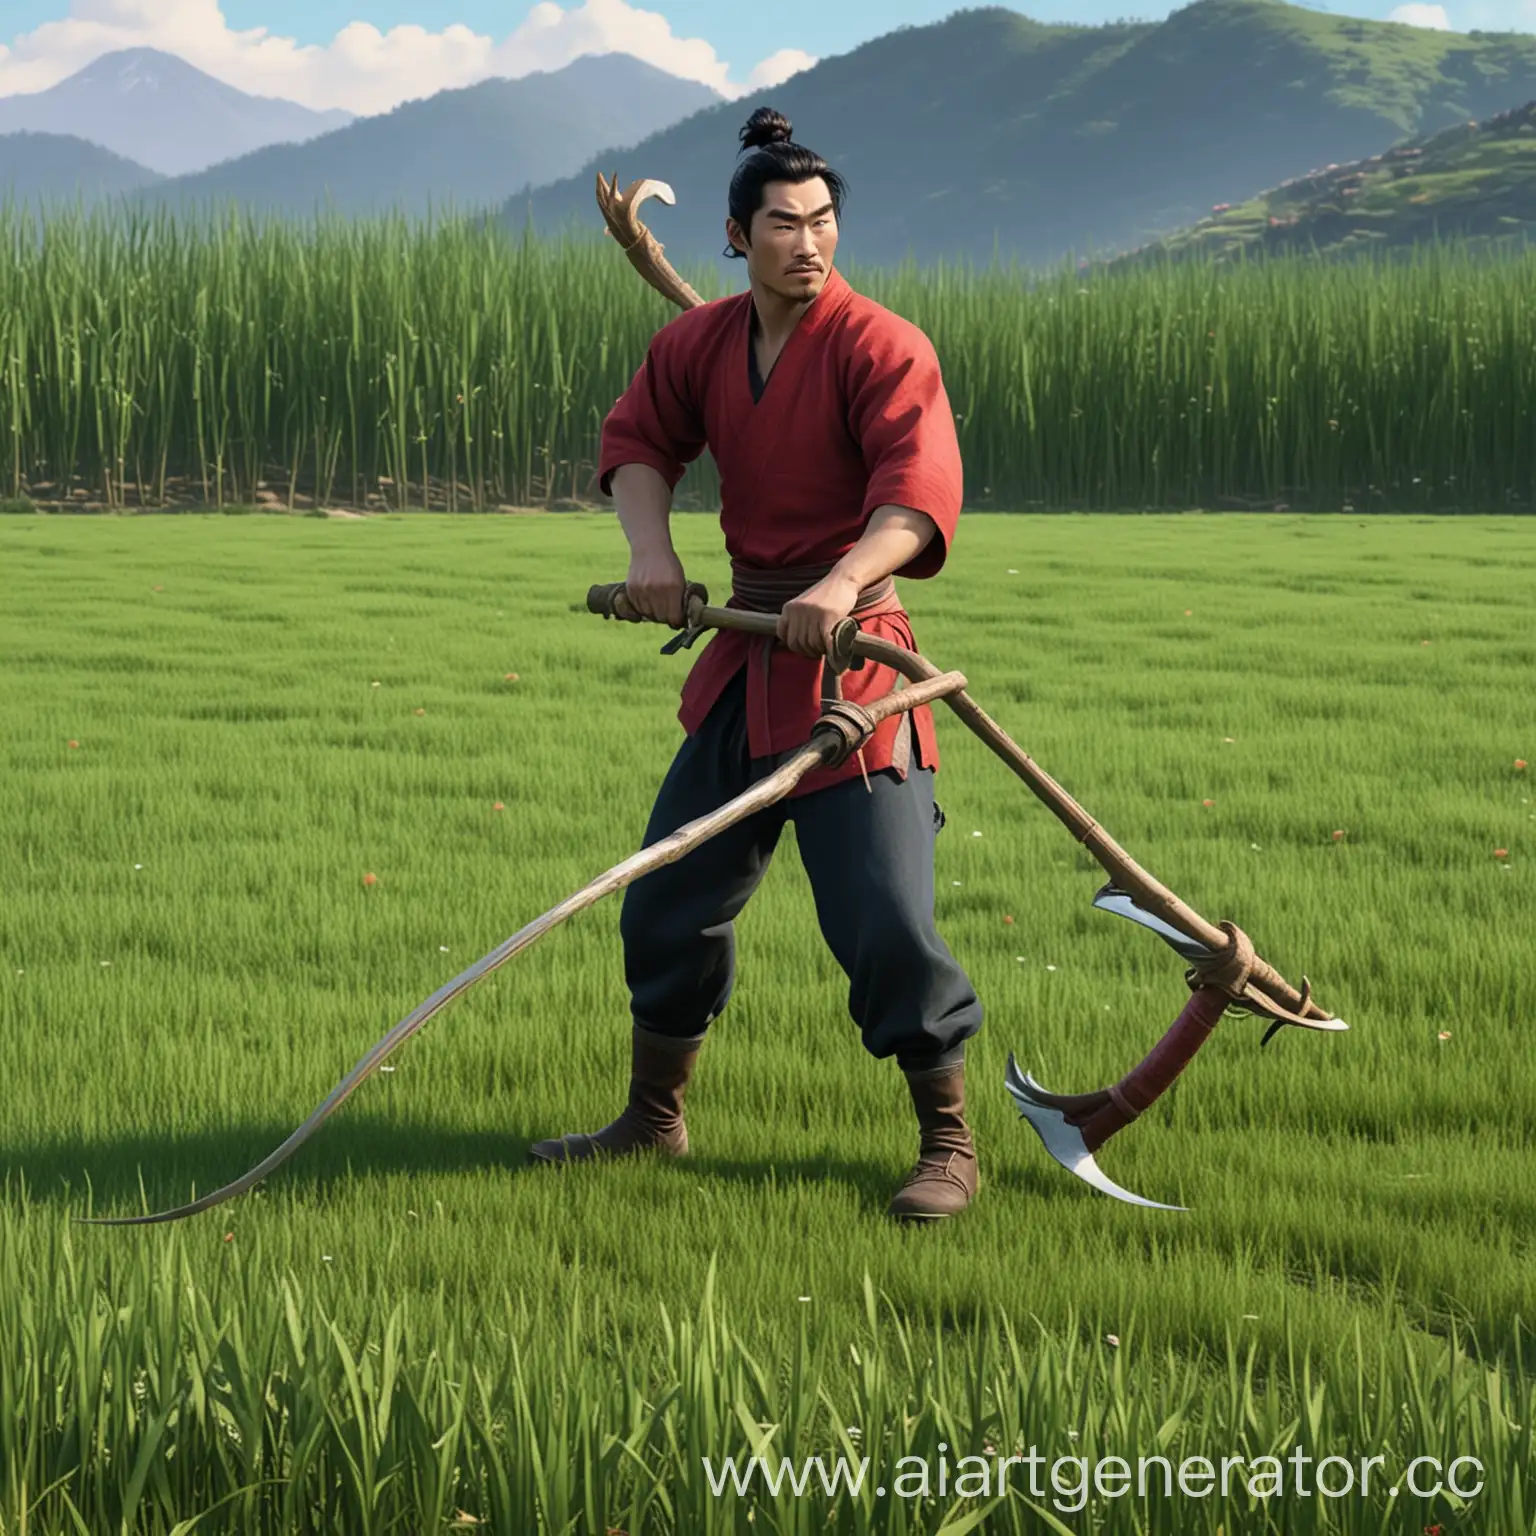 Man-from-Mulan-Cartoon-Mowing-Grass-with-Scythe-in-Field